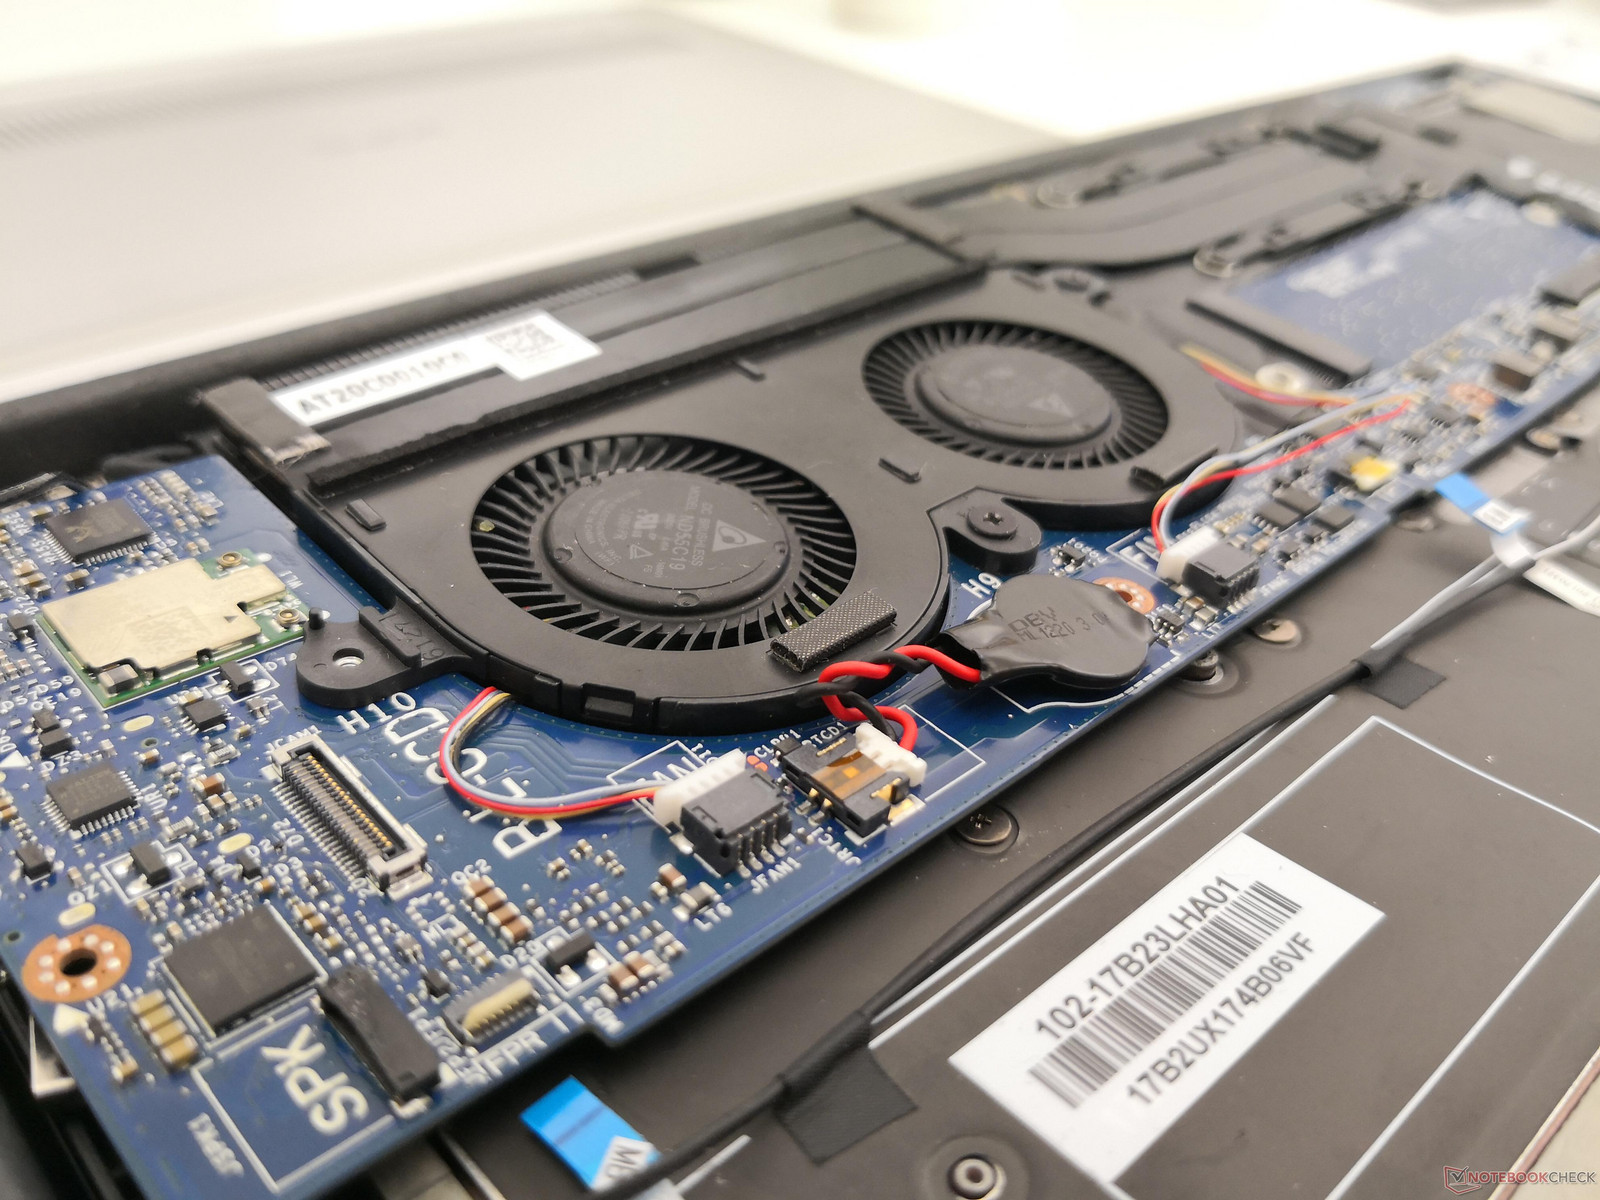 dell power manager fan control